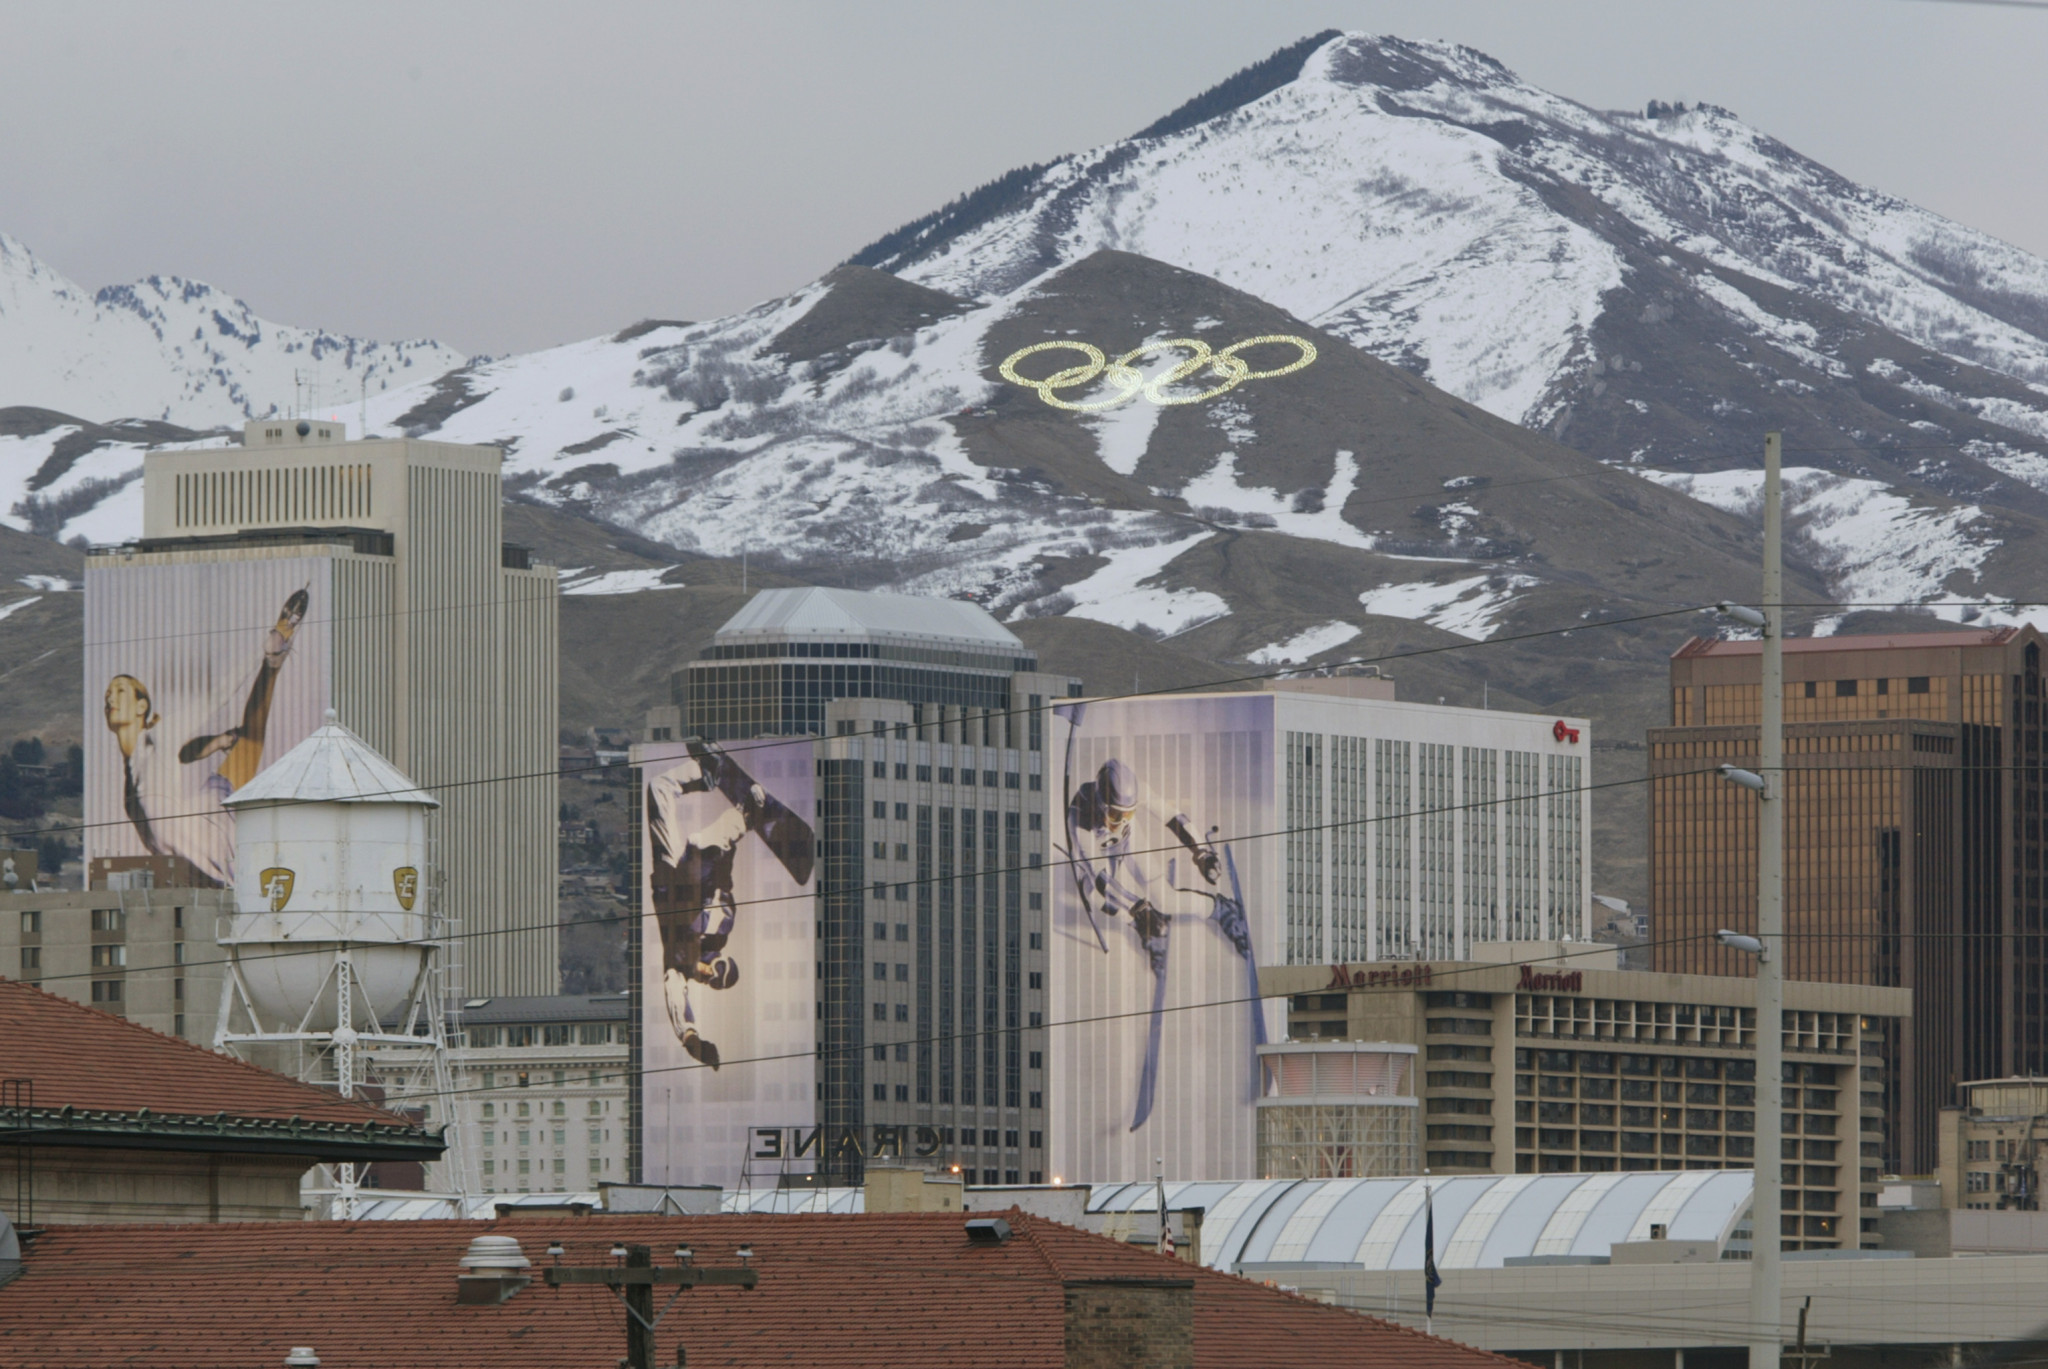 Salt Lake City is aiming to stage the Winter Olympics for the second time in 2030 or 2034 ©Getty Images